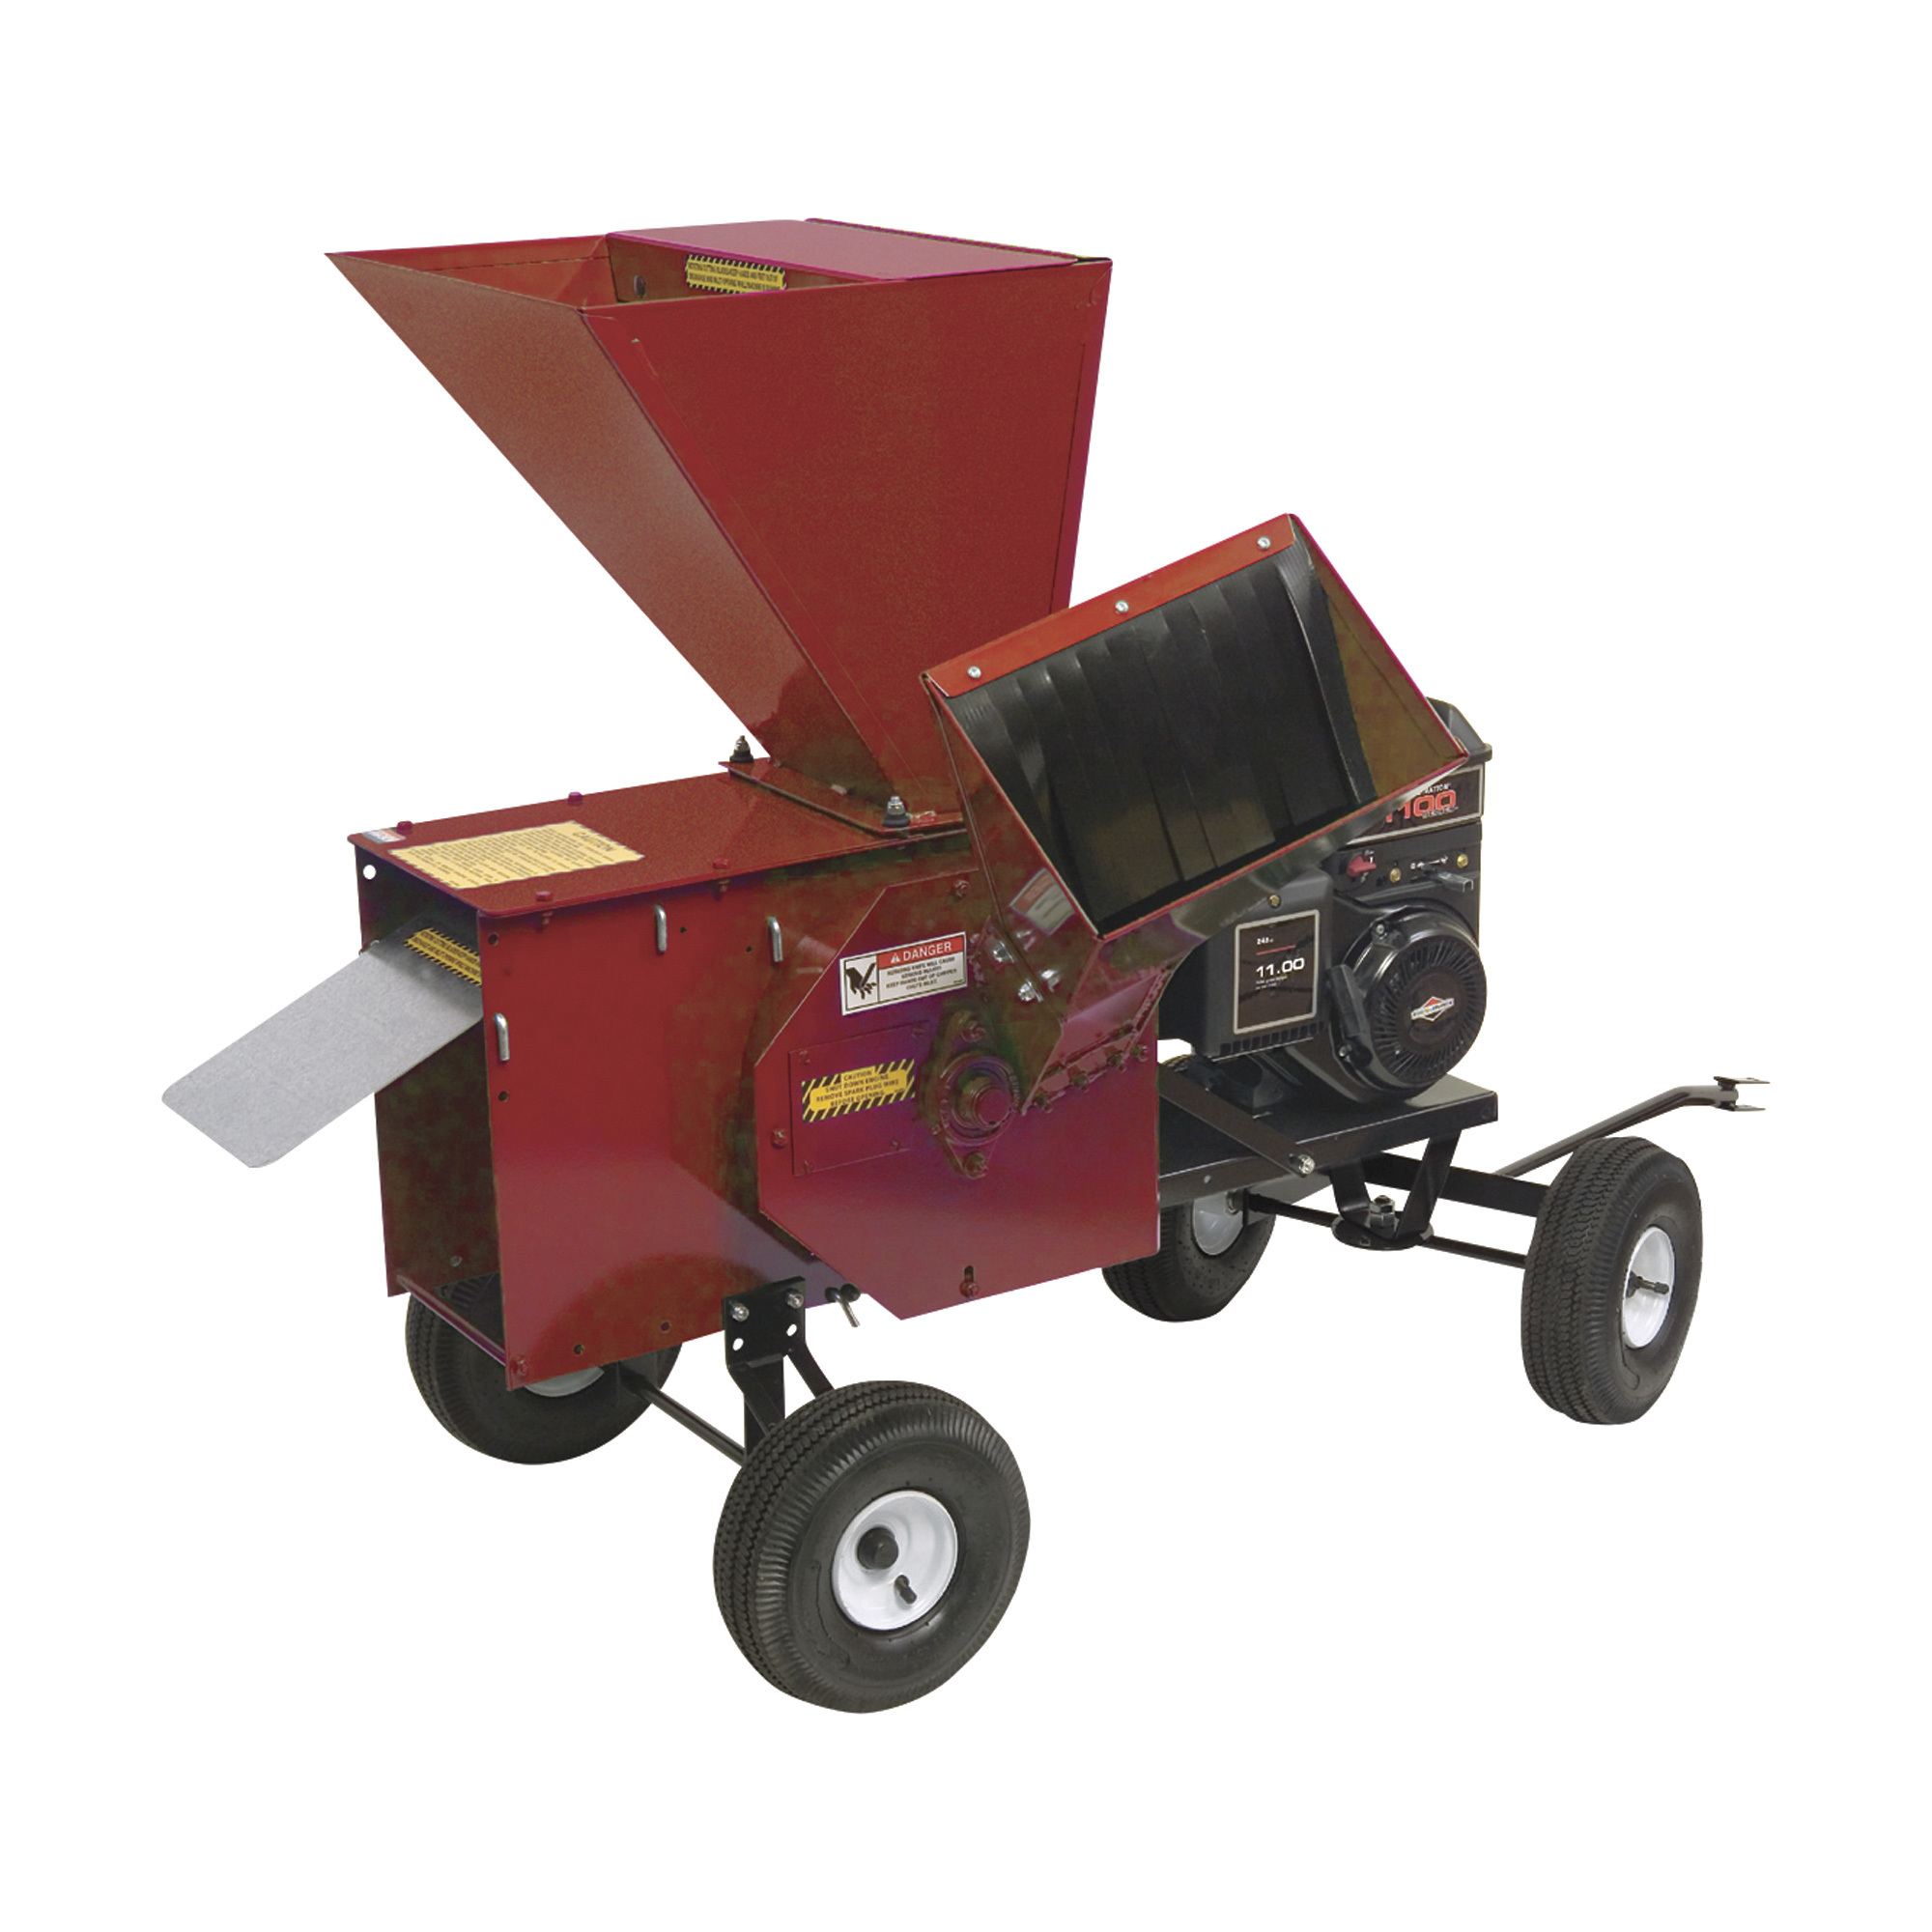 Tow-Behind Wood Chipper/Shredder — 249cc Briggs & Stratton 1150 Series OHV Engine, 3 1/2Inch Chipping Capacity, Model - Merry Mac 12PT1100M